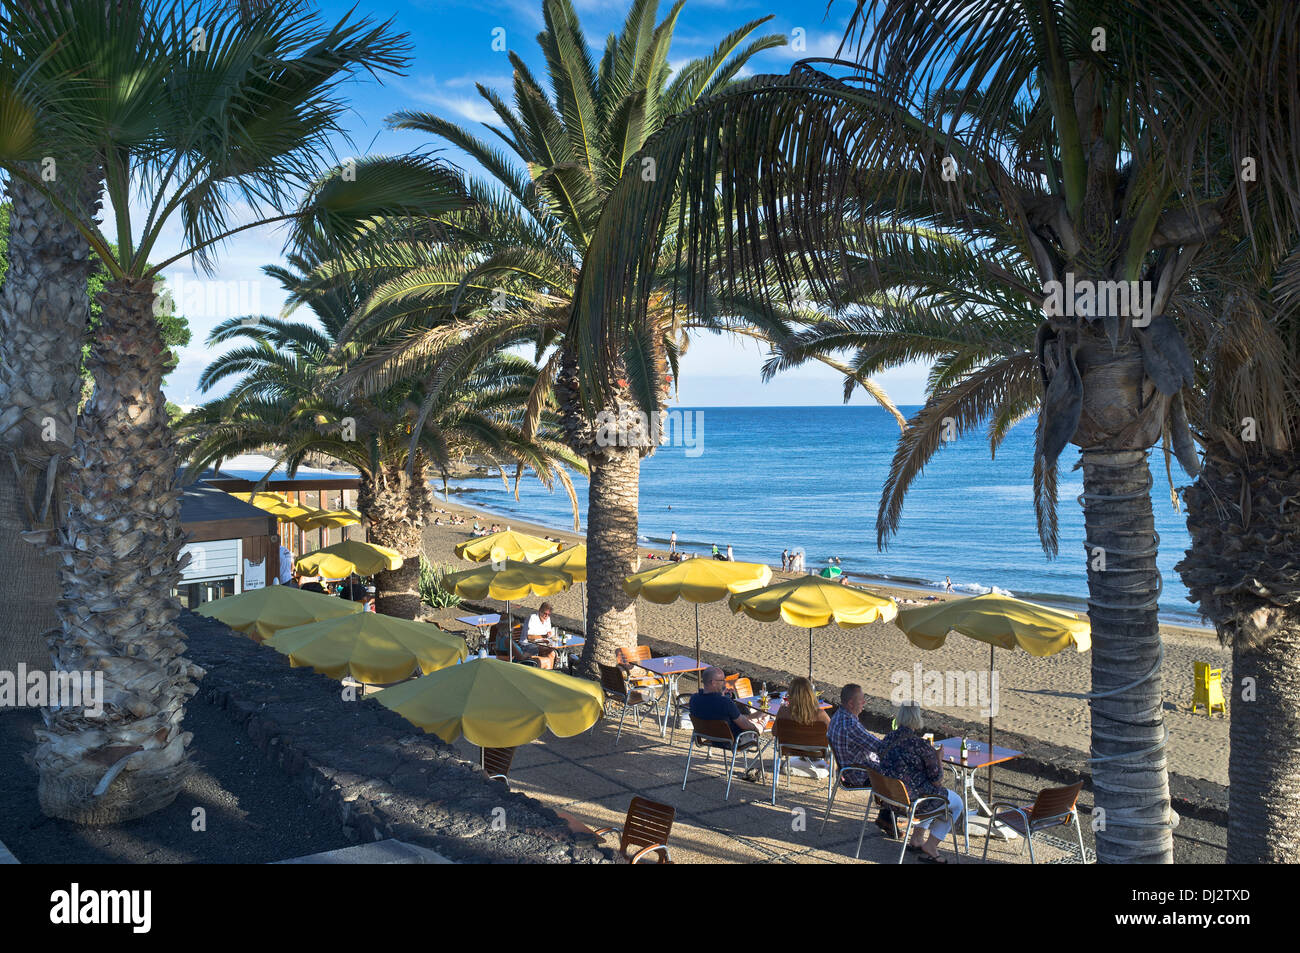 dh Beach PUERTO DEL CARMEN LANZAROTE Tourists sitting cafe tables overlooking beach alfresco cafes holiday Stock Photo